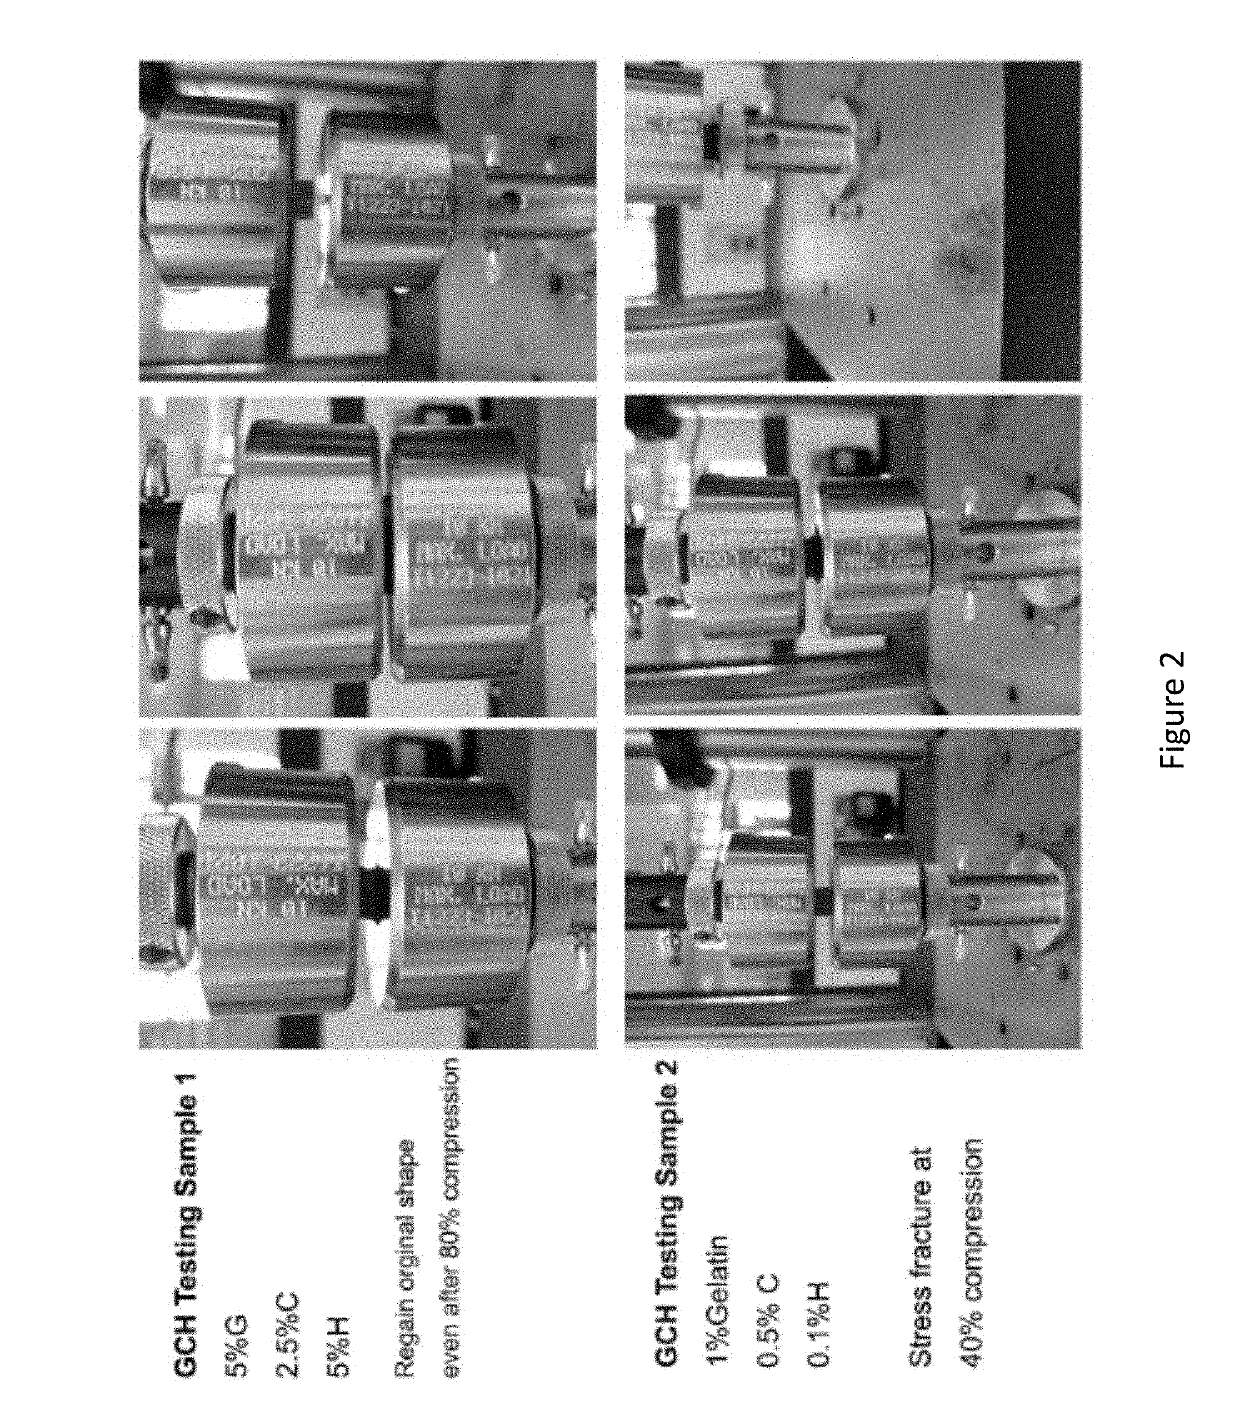 Composition and methods for culturing retinal progenitor cells